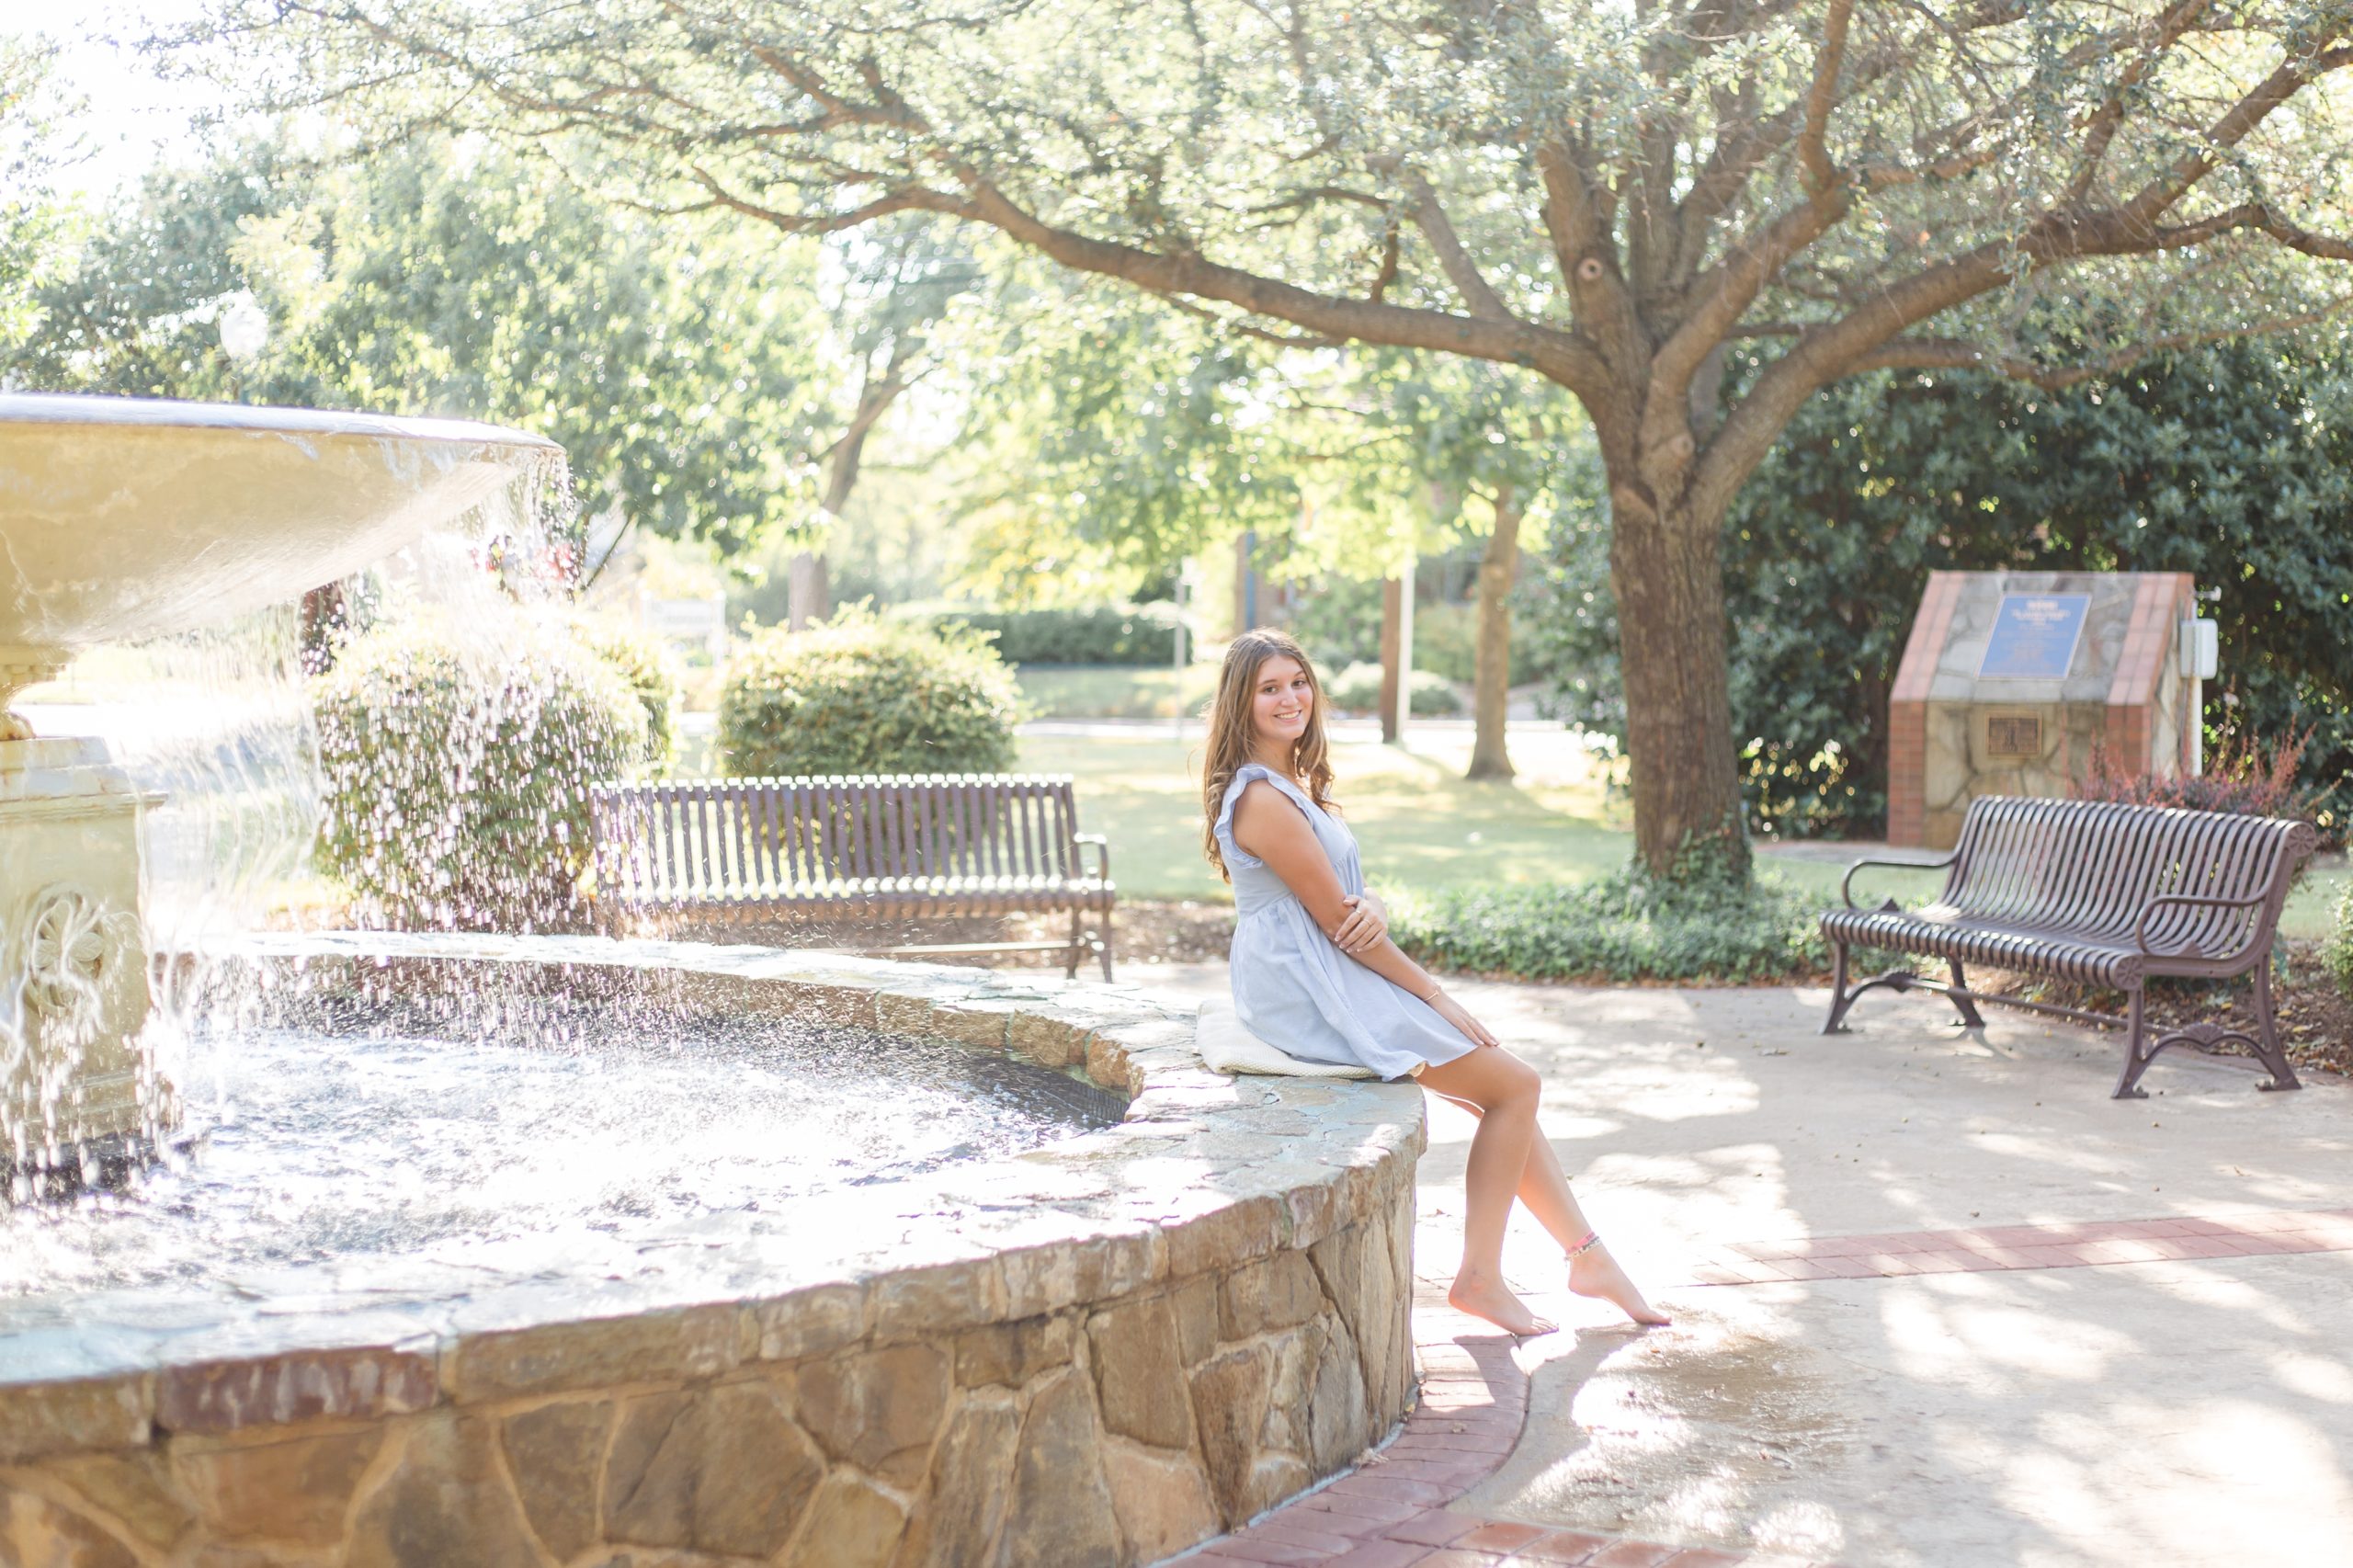 Hope's senior session was a blast! Our favorite photo from this session is of her in a blue sundress sitting on a fountain outside of the historic Downtown McKinney Square. Click to see more from this senior session by Wisp + Willow Photography Co.